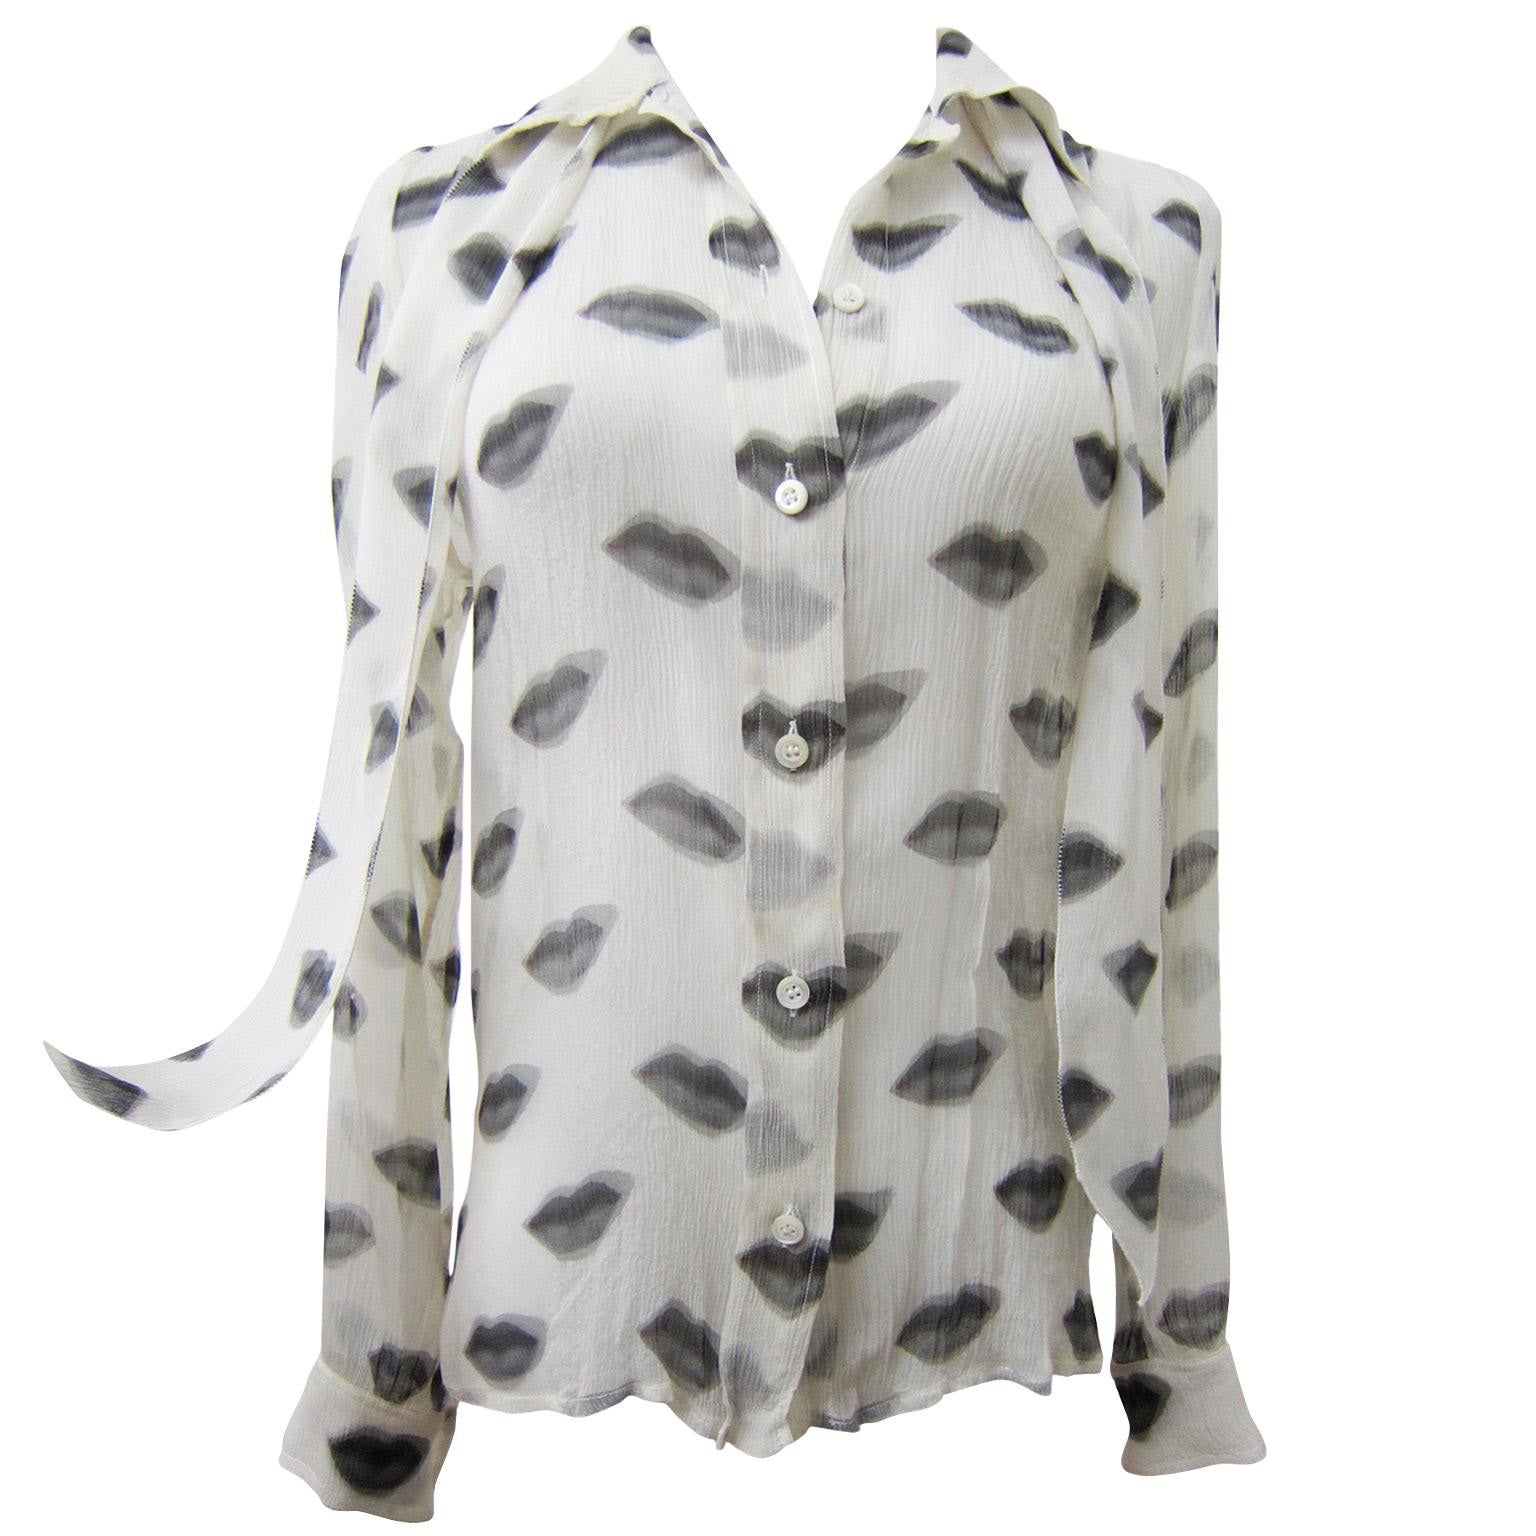 Prada Iconic Black Lip Print Silk White Blouse Top With Bow SS 2000 For Sale